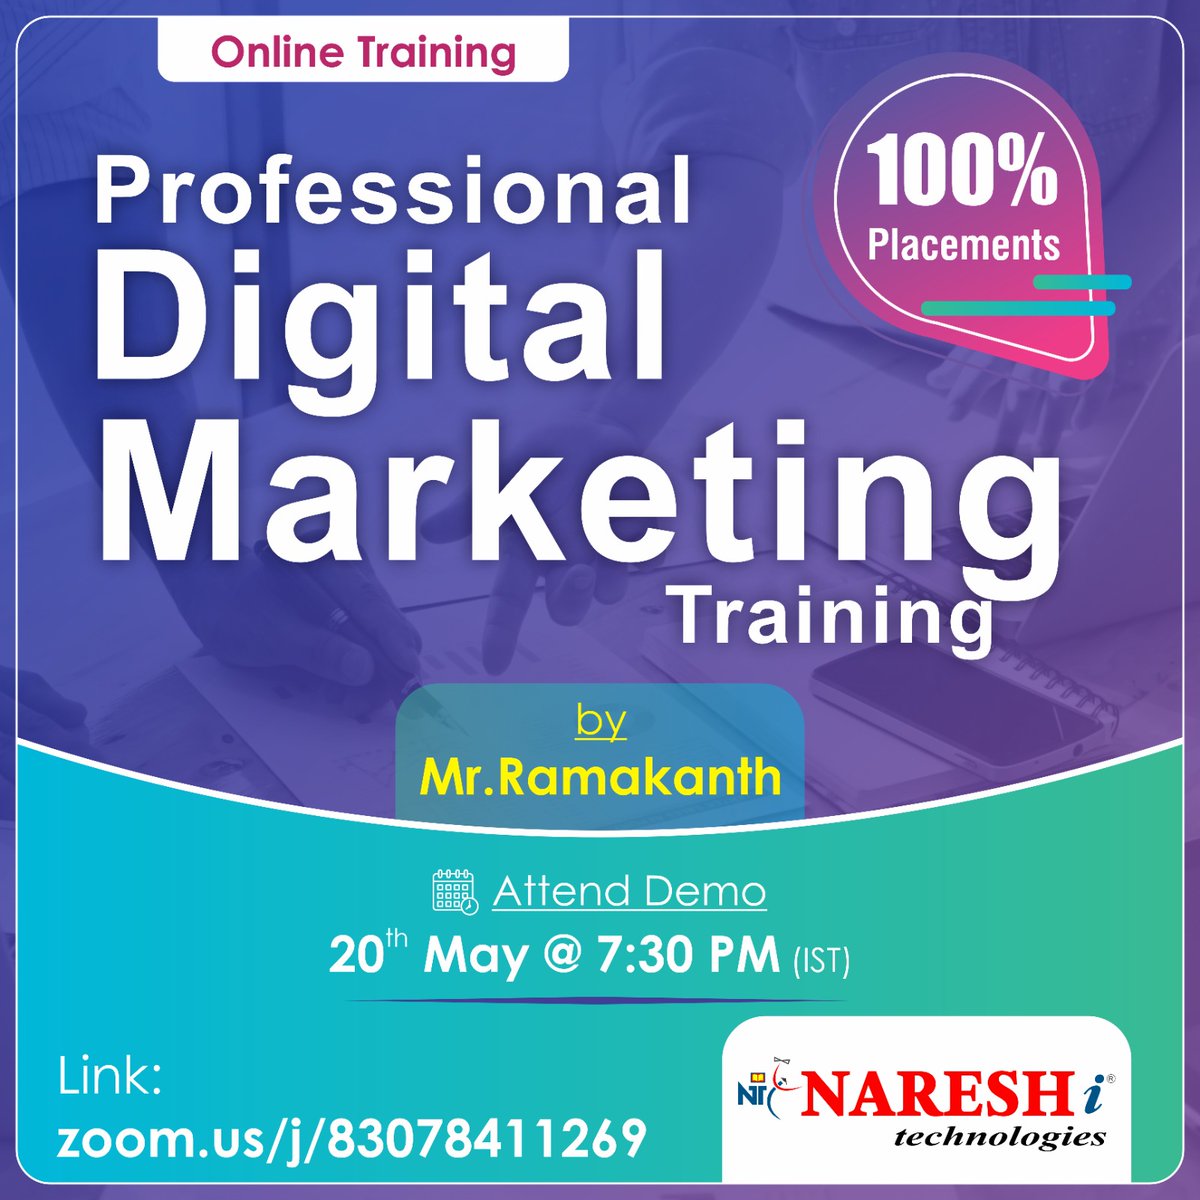 ✍️Enroll Now: zurl.co/QXbH
👉Attend Free Demo On Digital Marketing by Mr. Ramakanth.
📅Demo On: 20th May @ 7:30 PM (IST)

#Digitalmarketing #seo #sem #onlinetraining #youtubemarketing #software #learnfromhome #nareshit